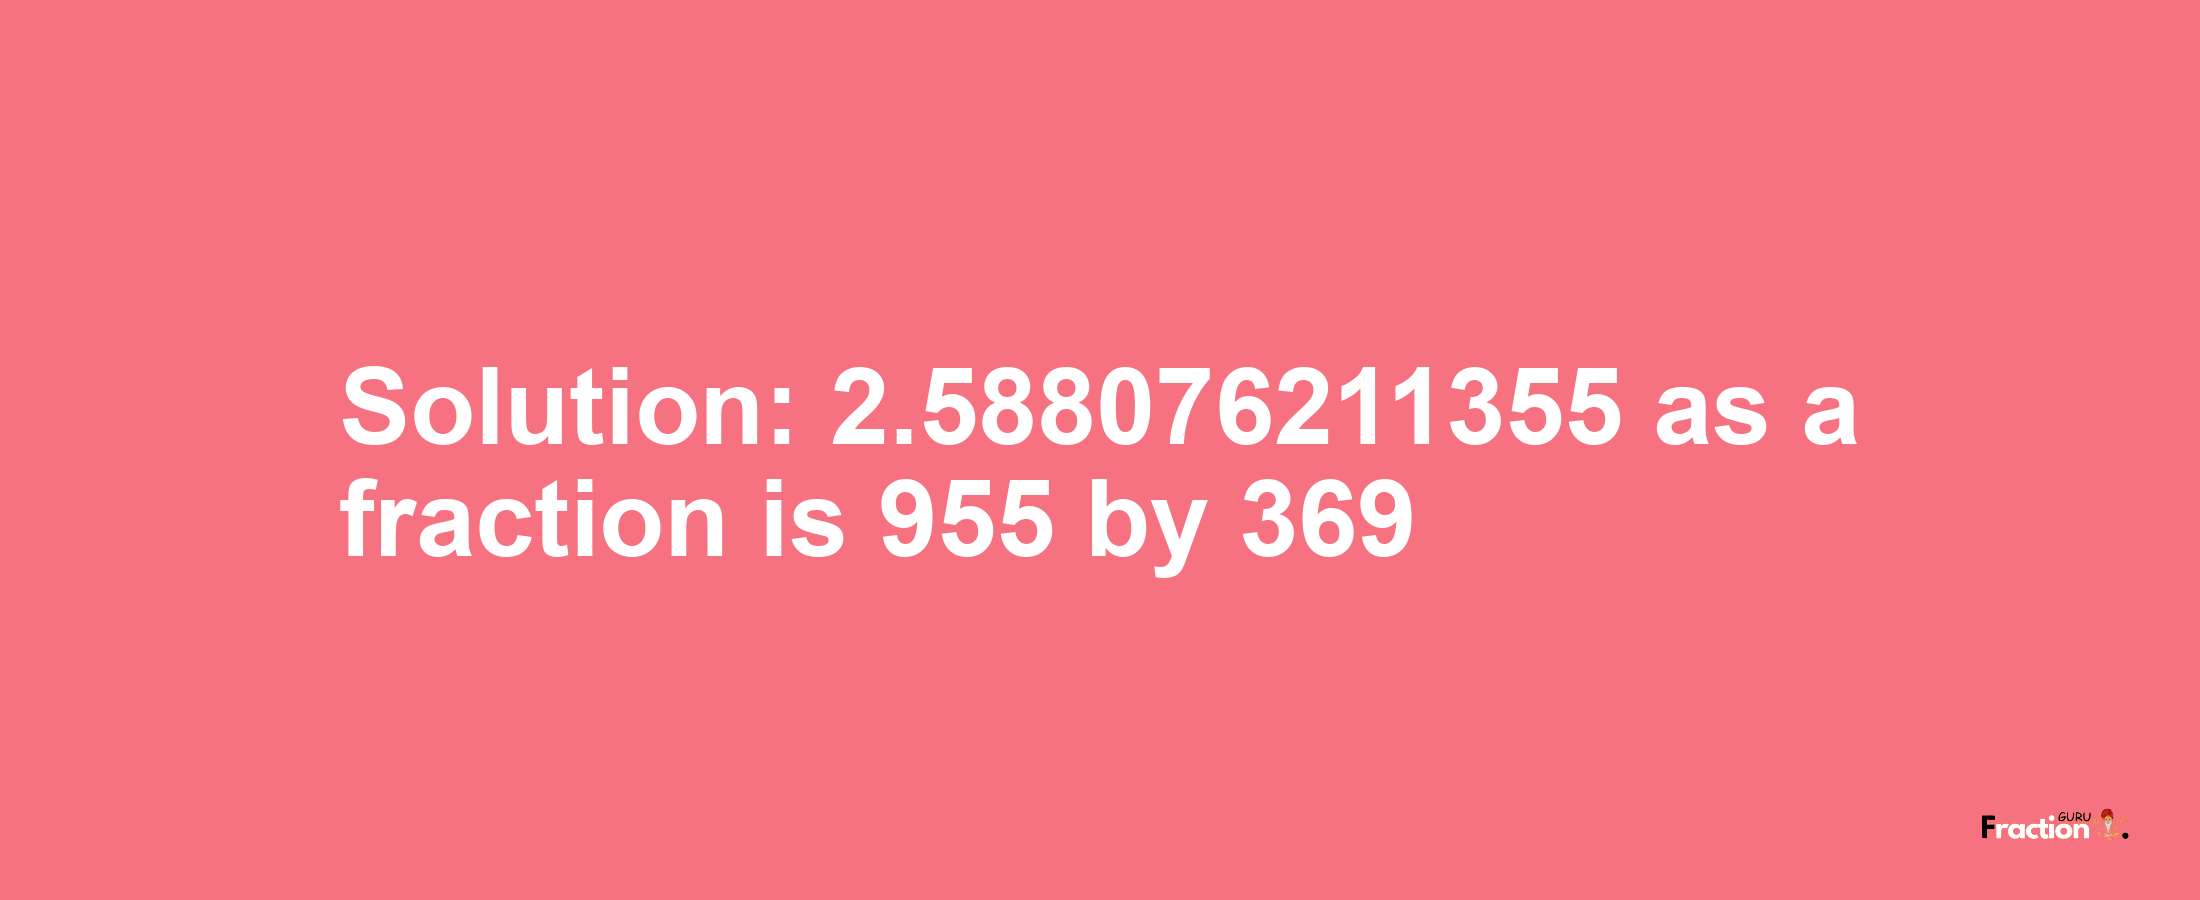 Solution:2.588076211355 as a fraction is 955/369